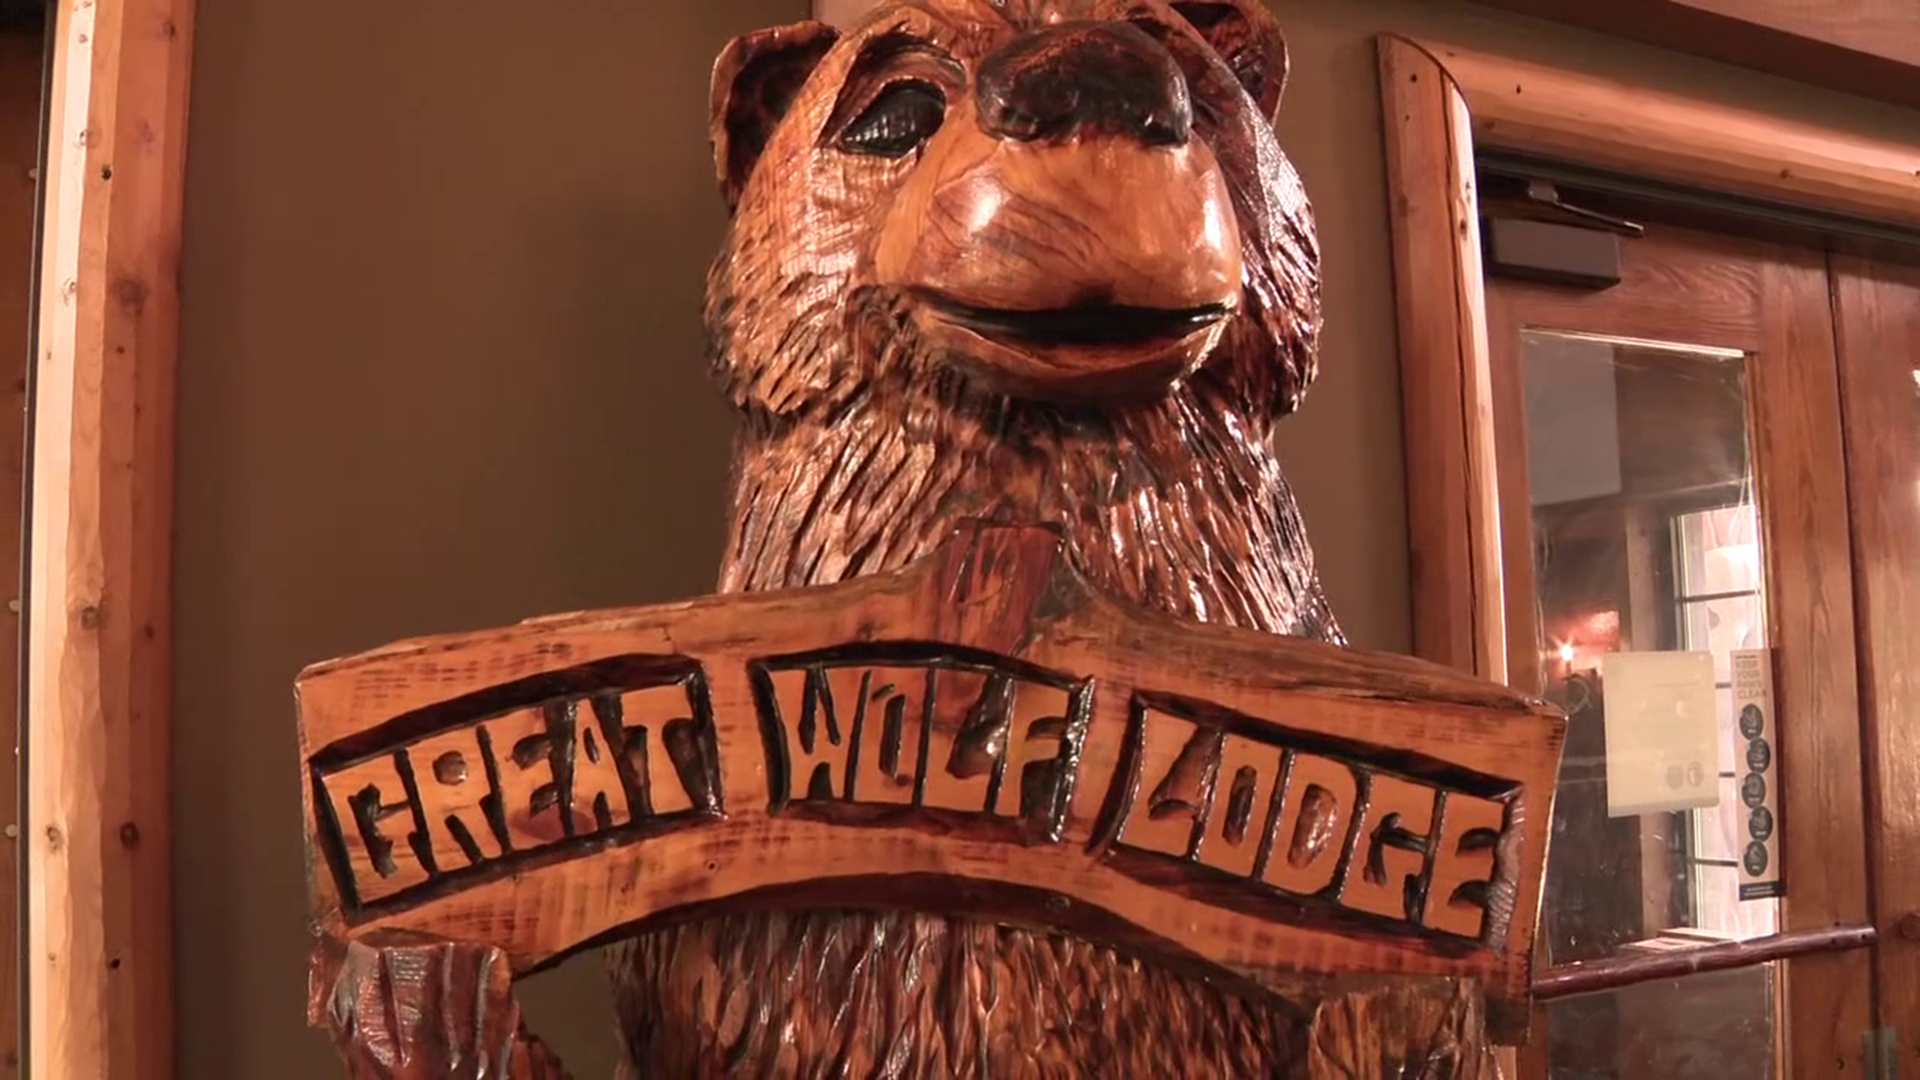 Masks stay on at Great Wolf Lodge